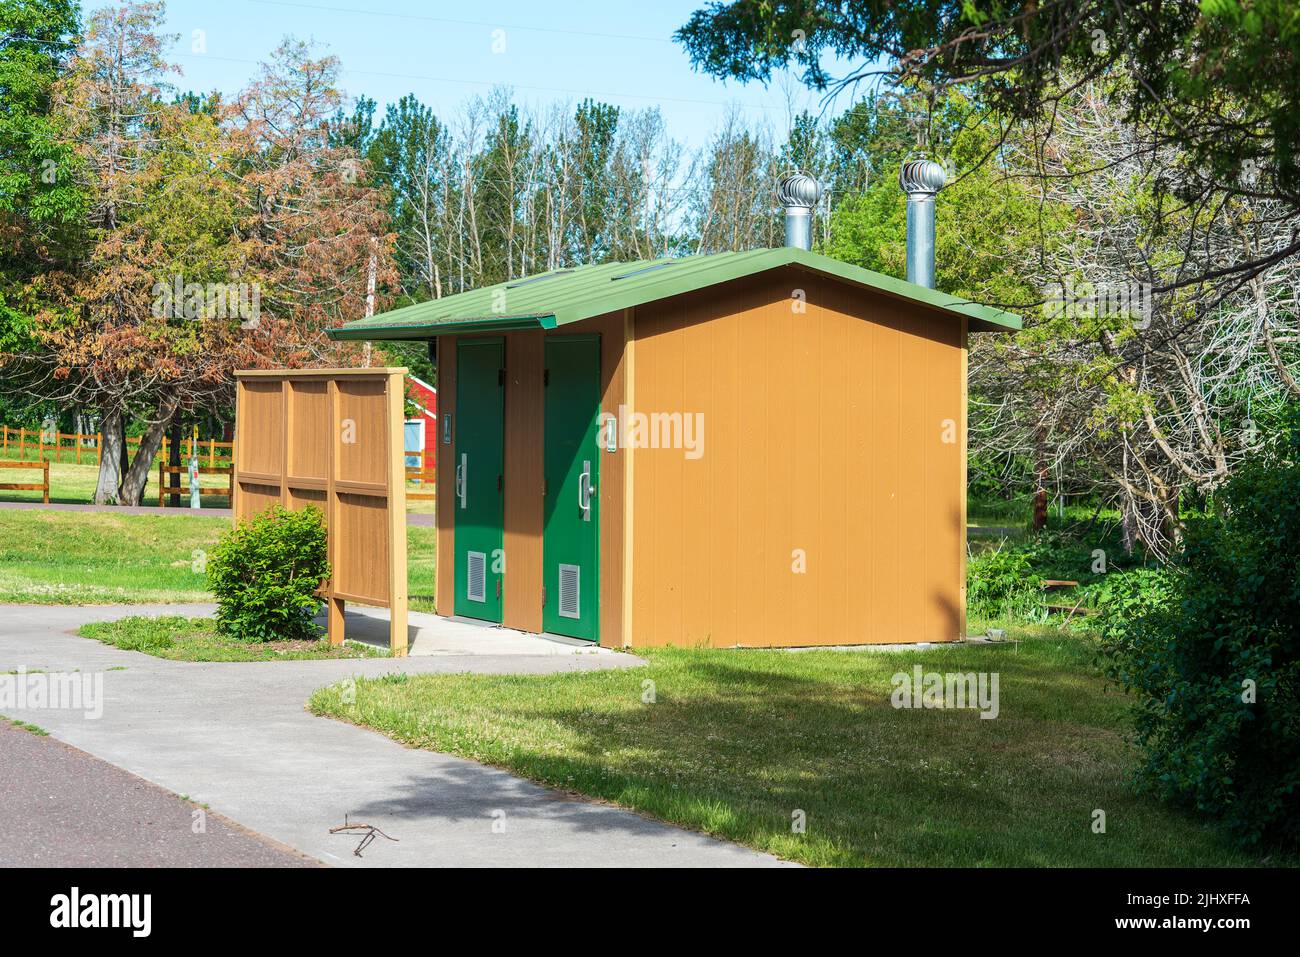 Rural public restroom facility located at a roadside park Stock Photo